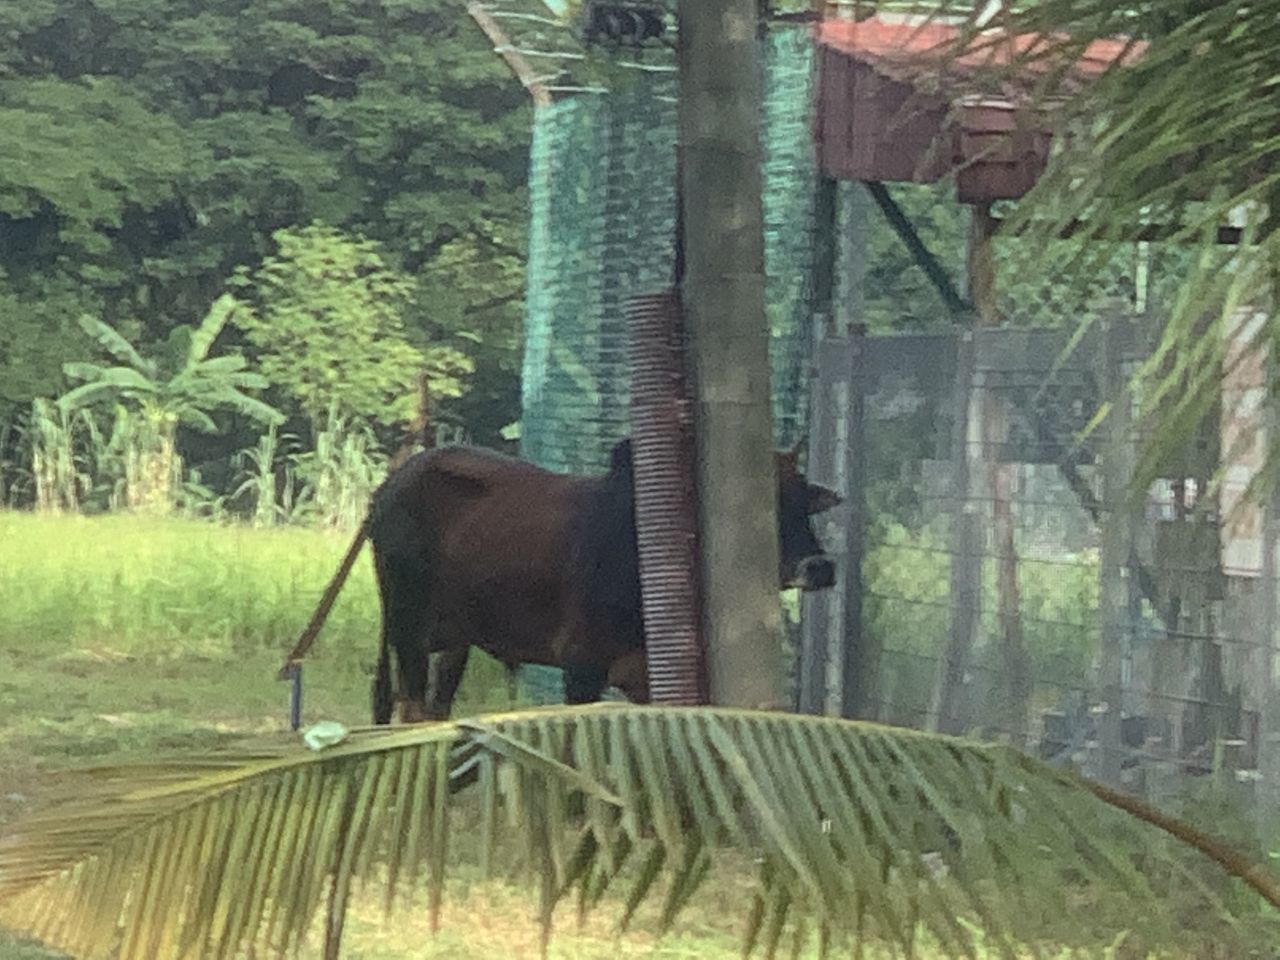 plant, tree, animal, elephant, animal themes, nature, jungle, mammal, day, growth, green, no people, one animal, land, animal wildlife, outdoors, domestic animals, zoo, field, built structure, grass, wildlife, forest, architecture, agriculture